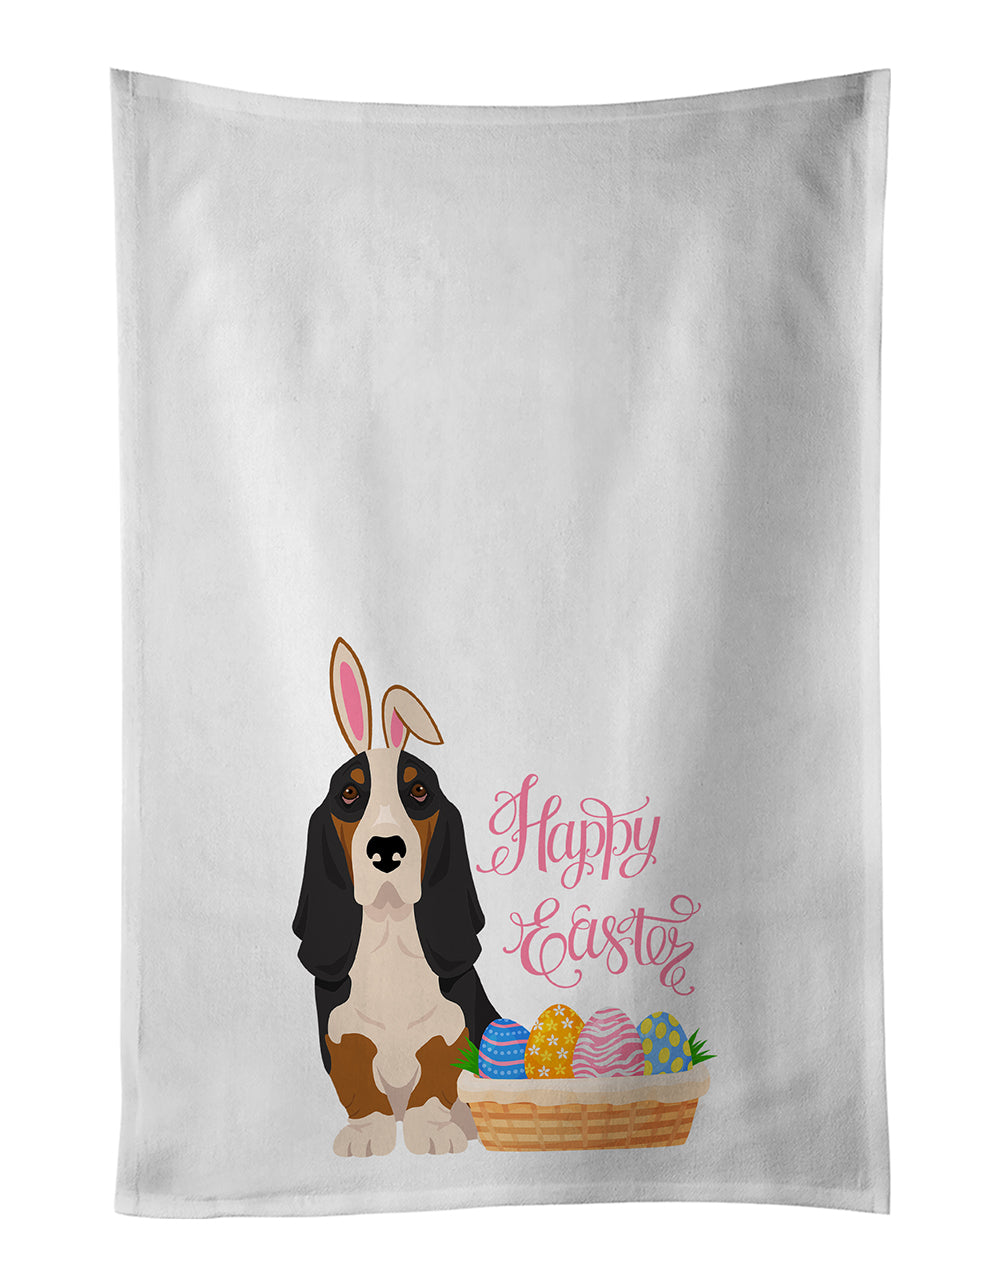 Buy this Black Tricolor Basset Hound Easter White Kitchen Towel Set of 2 Dish Towels